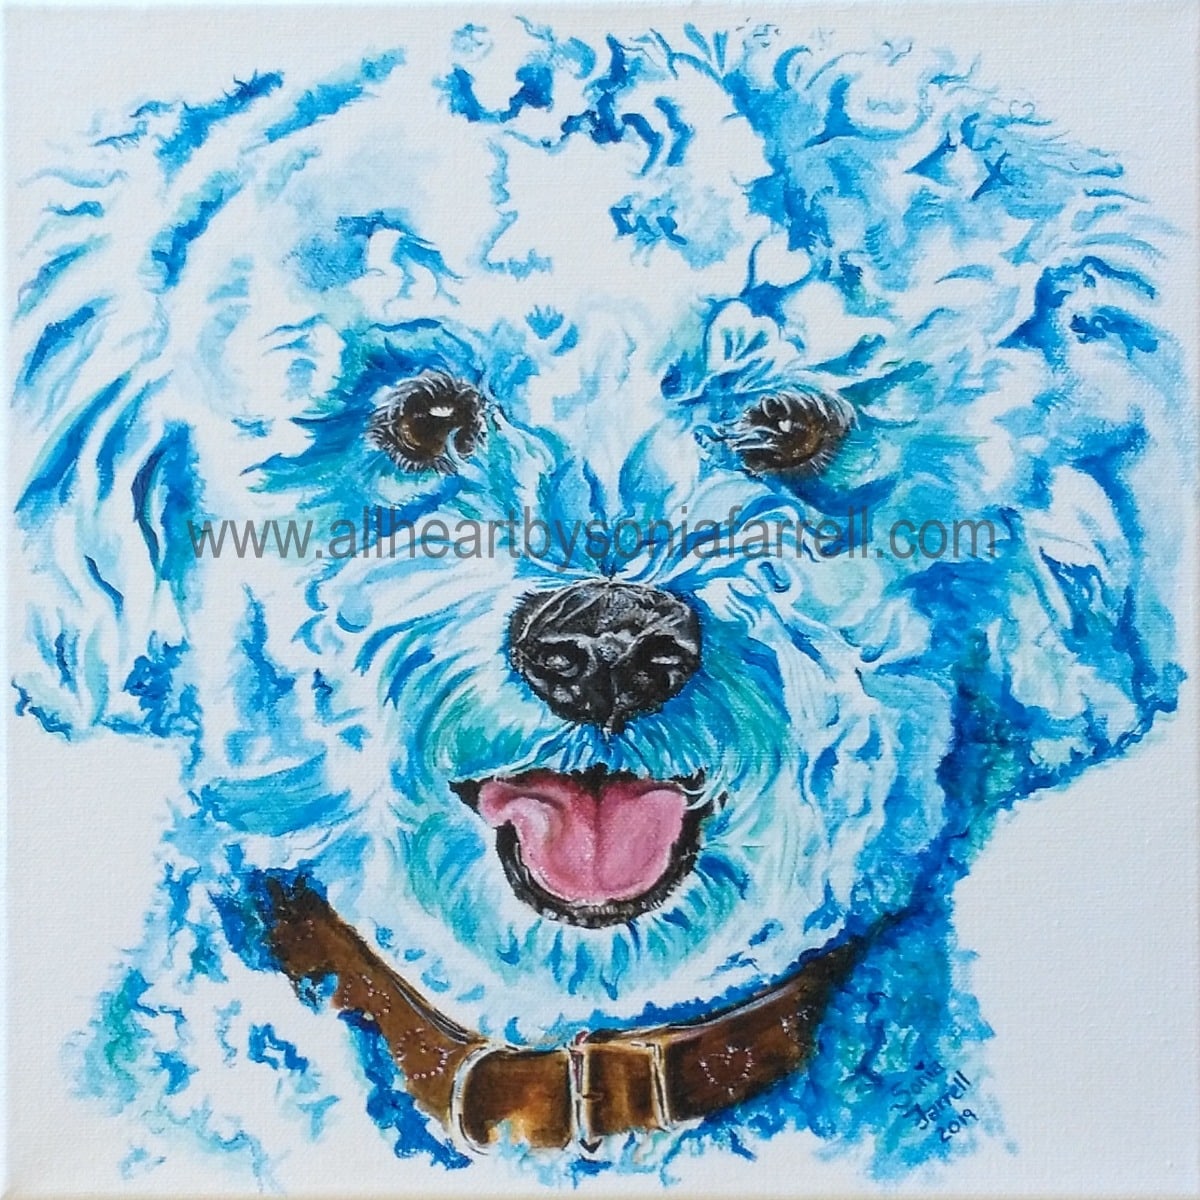 More about having a custom pet portrait painted by Sonia 